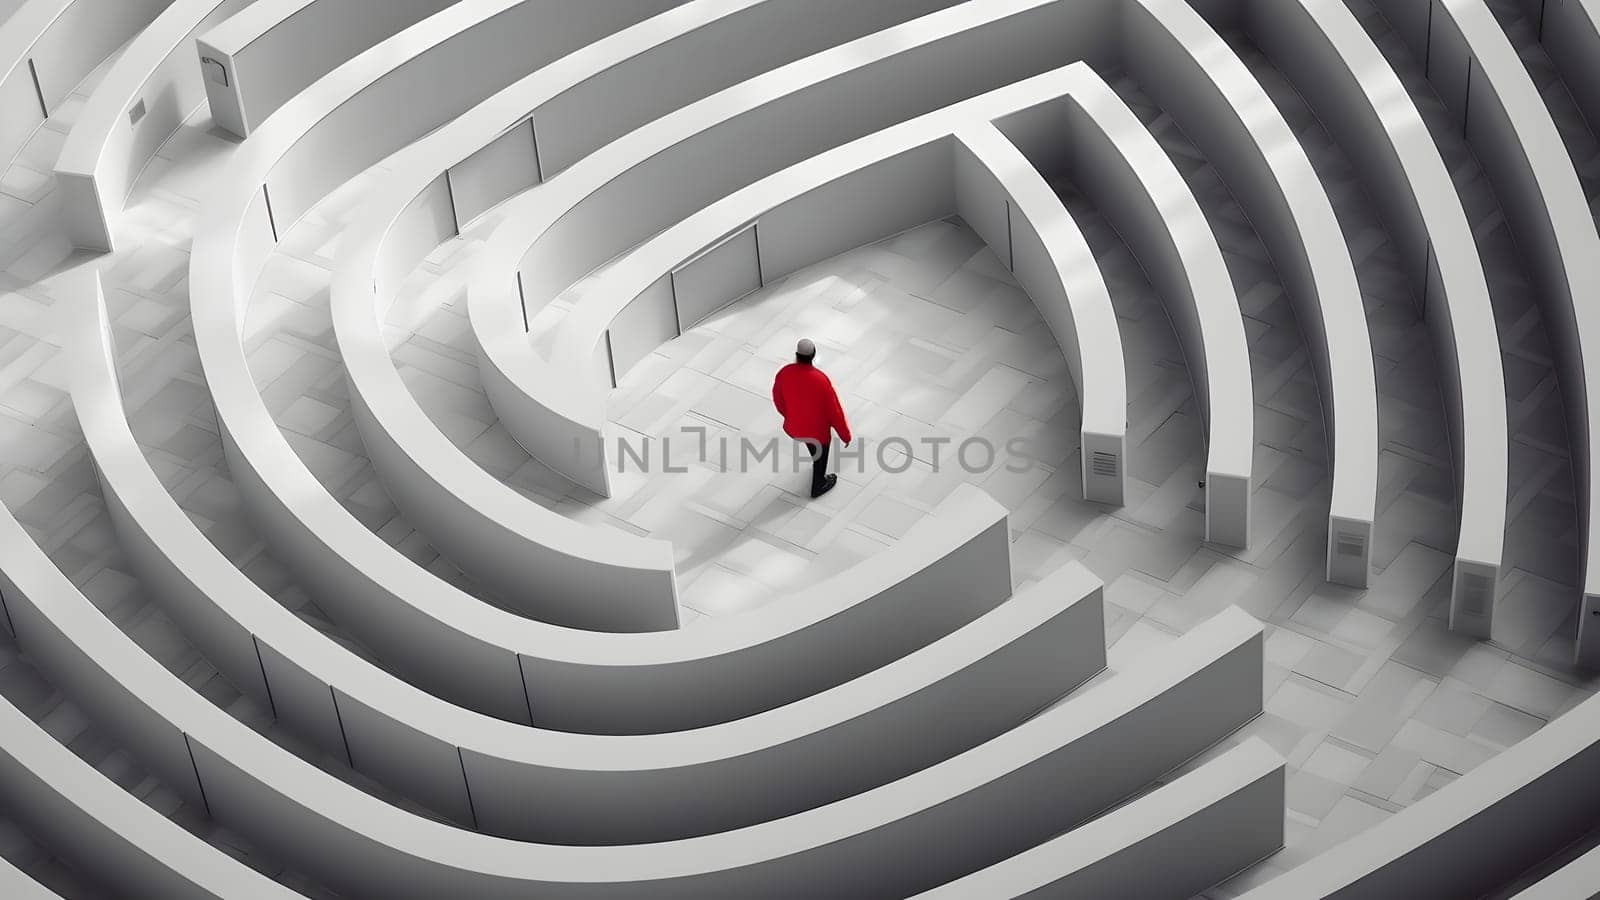 man in red jacket walking in the maze view from above, neural network generated image by z1b